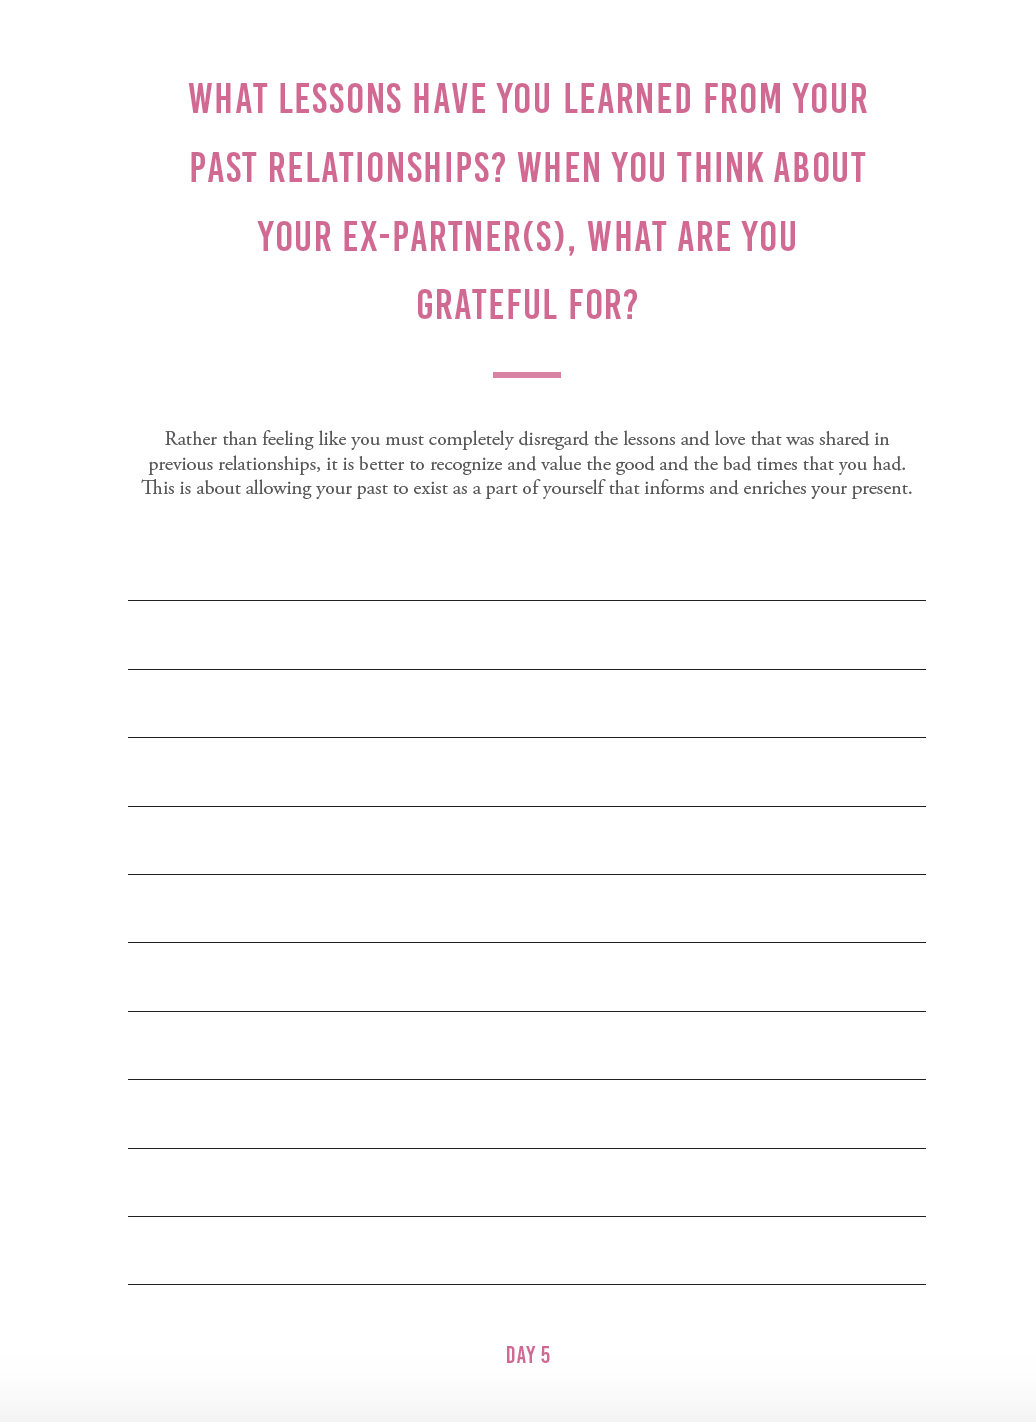 Explore Your Inner World | Love & Relationship Journal - The Happiness Planner®